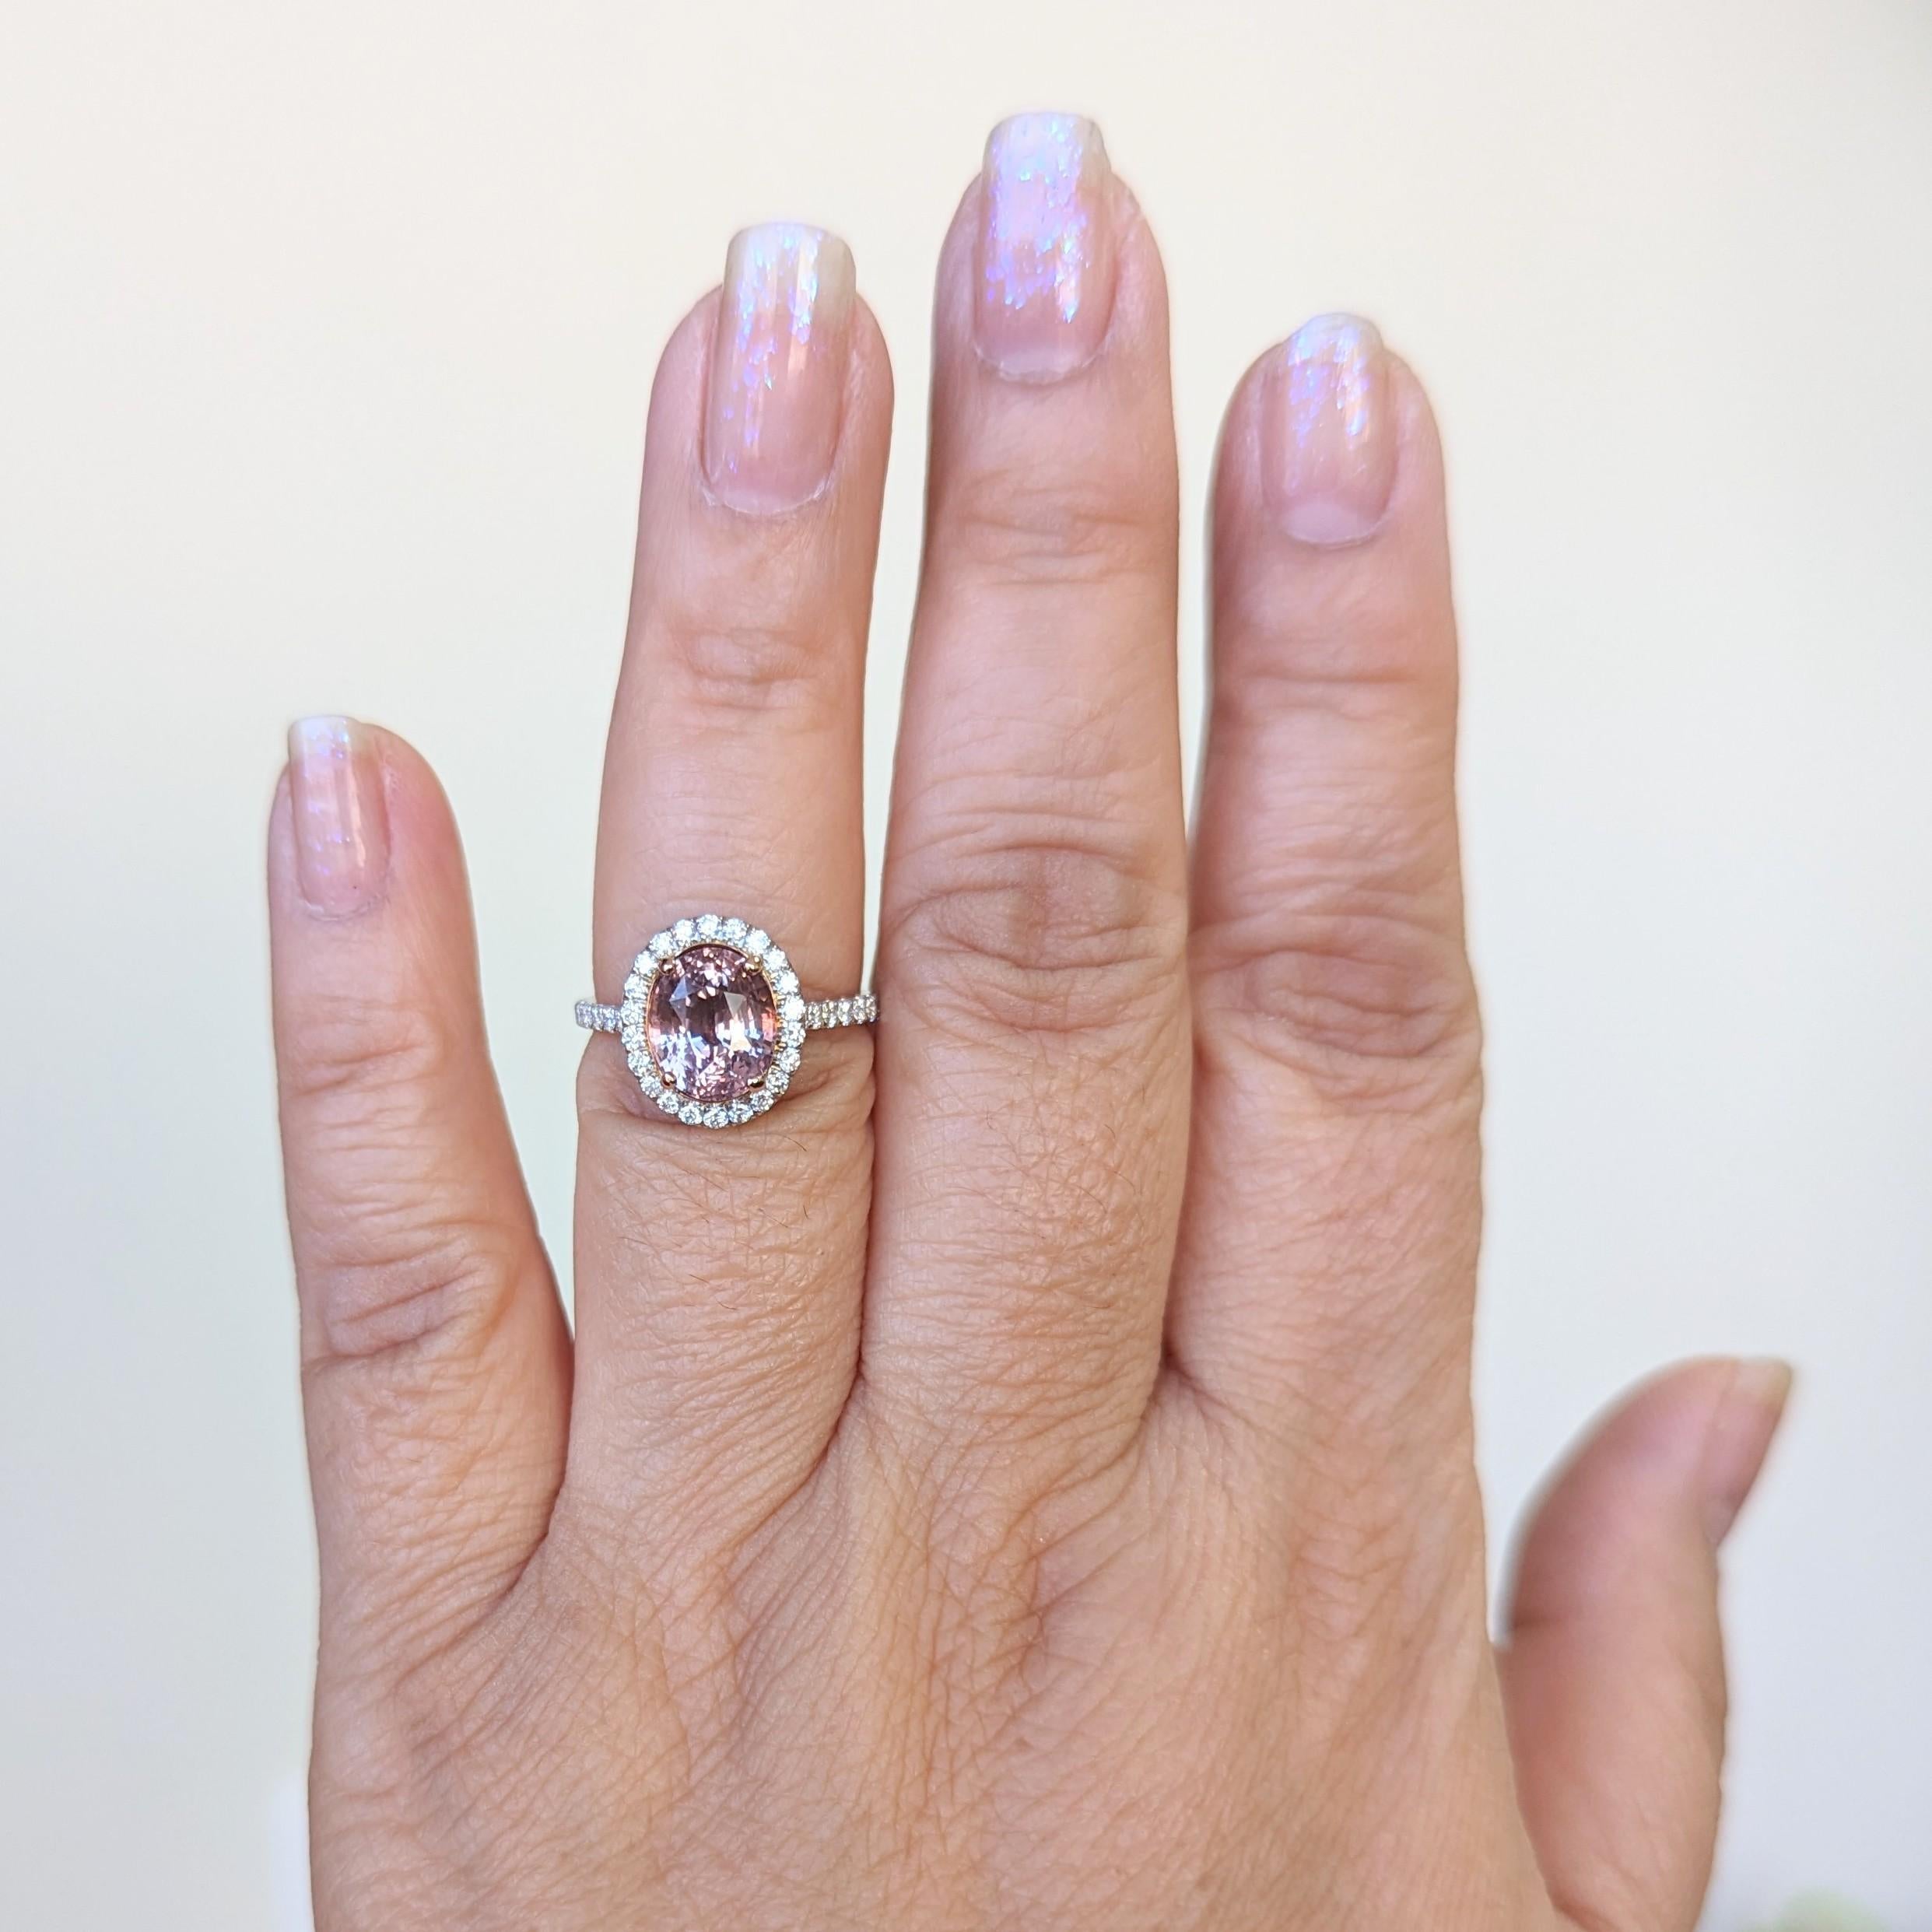 Gorgeous GIA unheated 3.55 ct. pink sapphire oval with good quality white diamond rounds.  Handmade in 18k yellow gold and platinum.  Ring size 6.5.  GIA certificate is included.